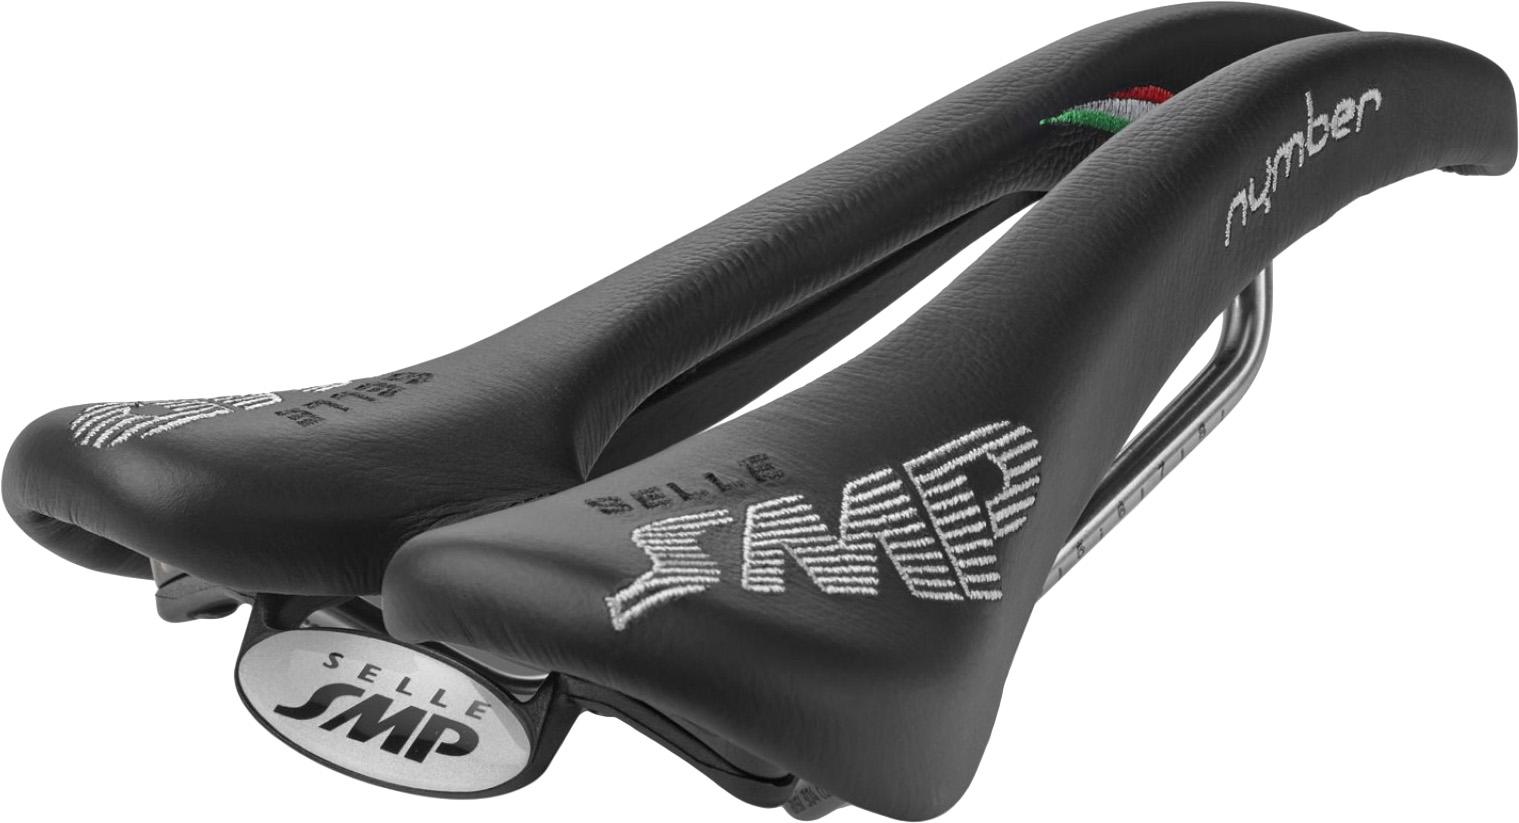 Selle Smp Nymber Saddle - Black